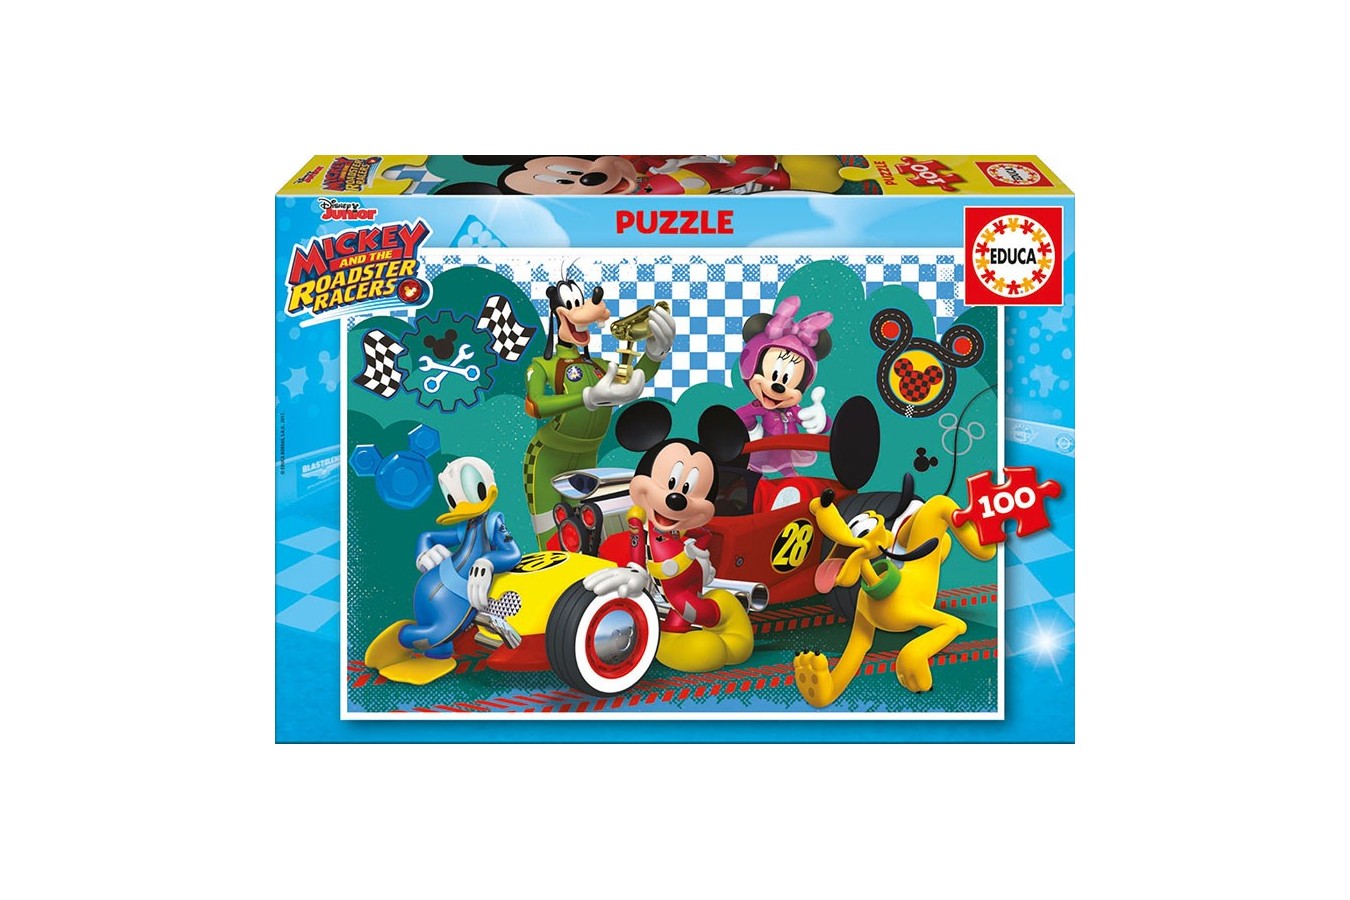 Puzzle Educa - Mickey and the Roadster Racers, 100 piese (17240)